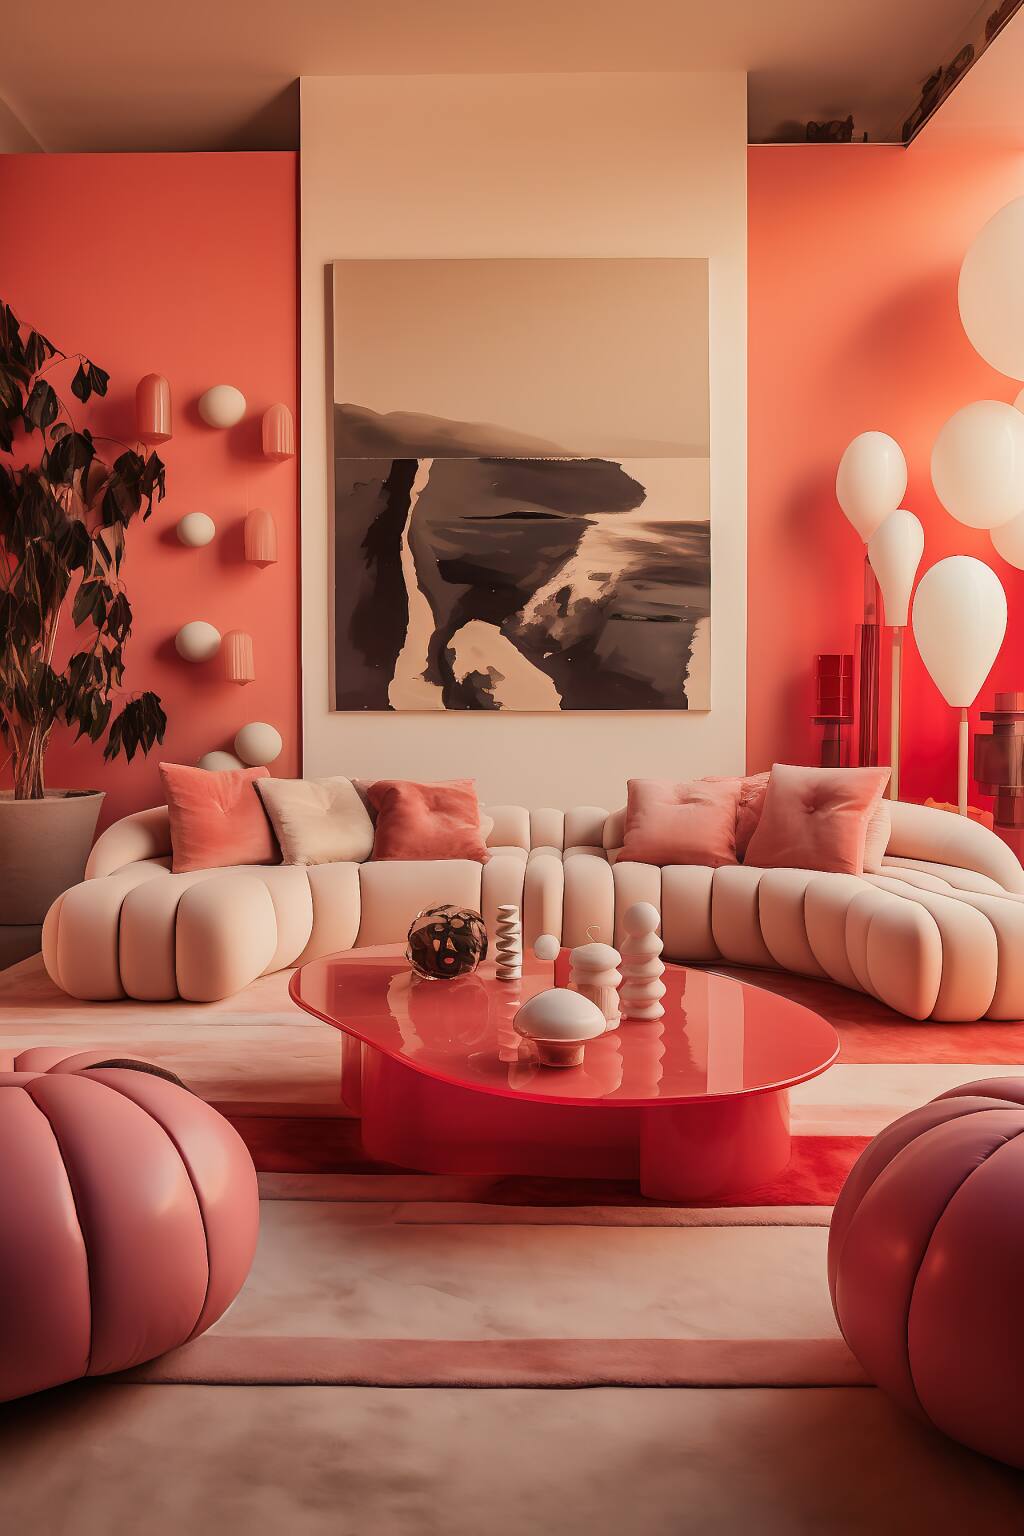 A Luxurious Minimalist Living Room With Peach-Pink Tones, A Red Coffee Table, And Romantic, Chic Decor.